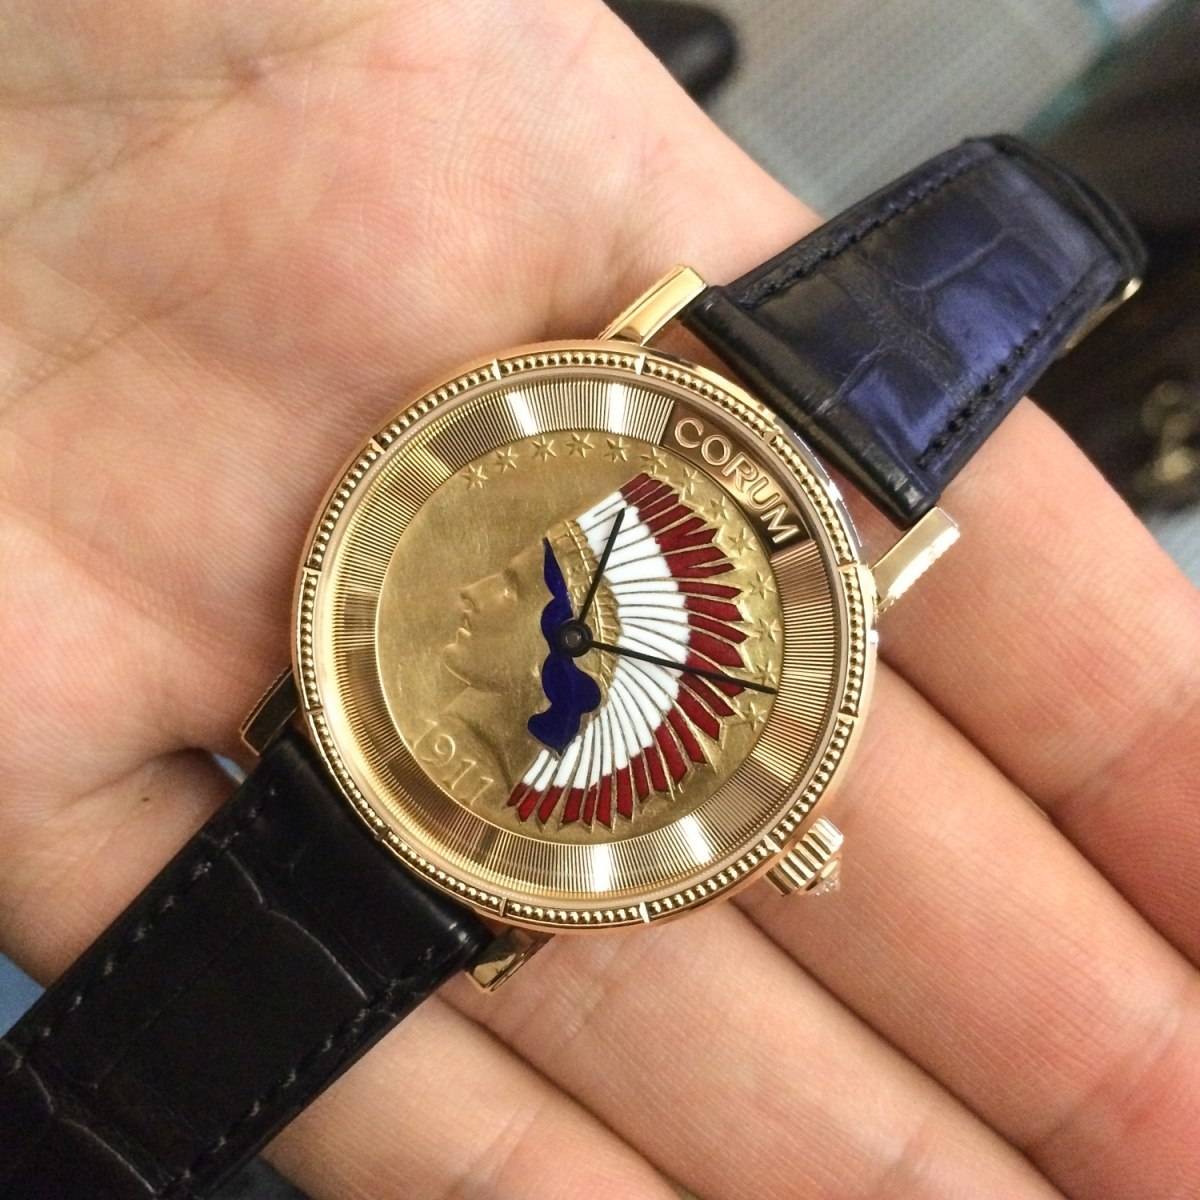 10 Dollars on the Dial: Corum Indian Head Coin Watch